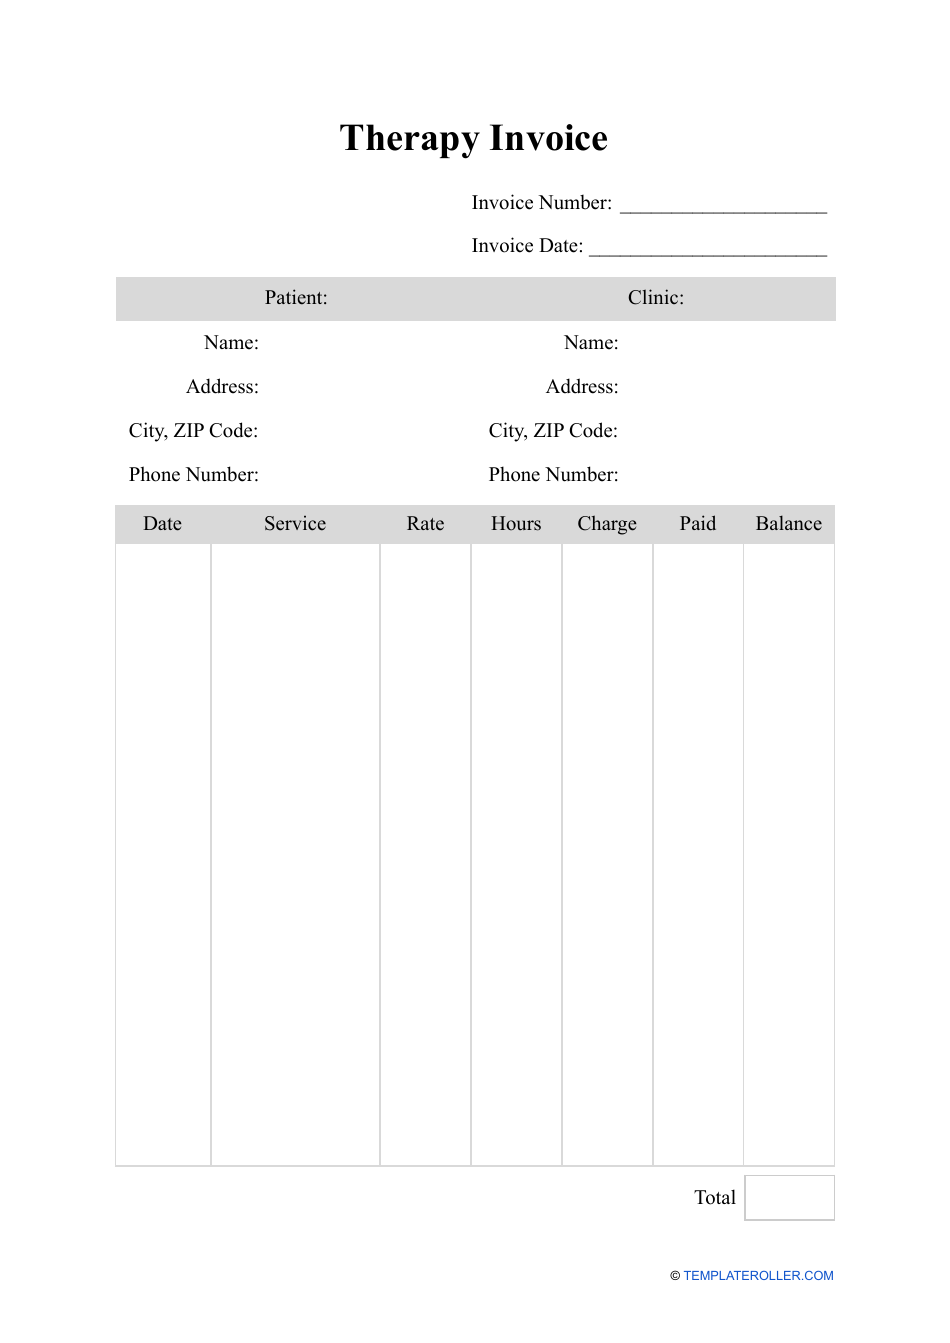 Therapy Invoice Template Download Printable PDF Templateroller